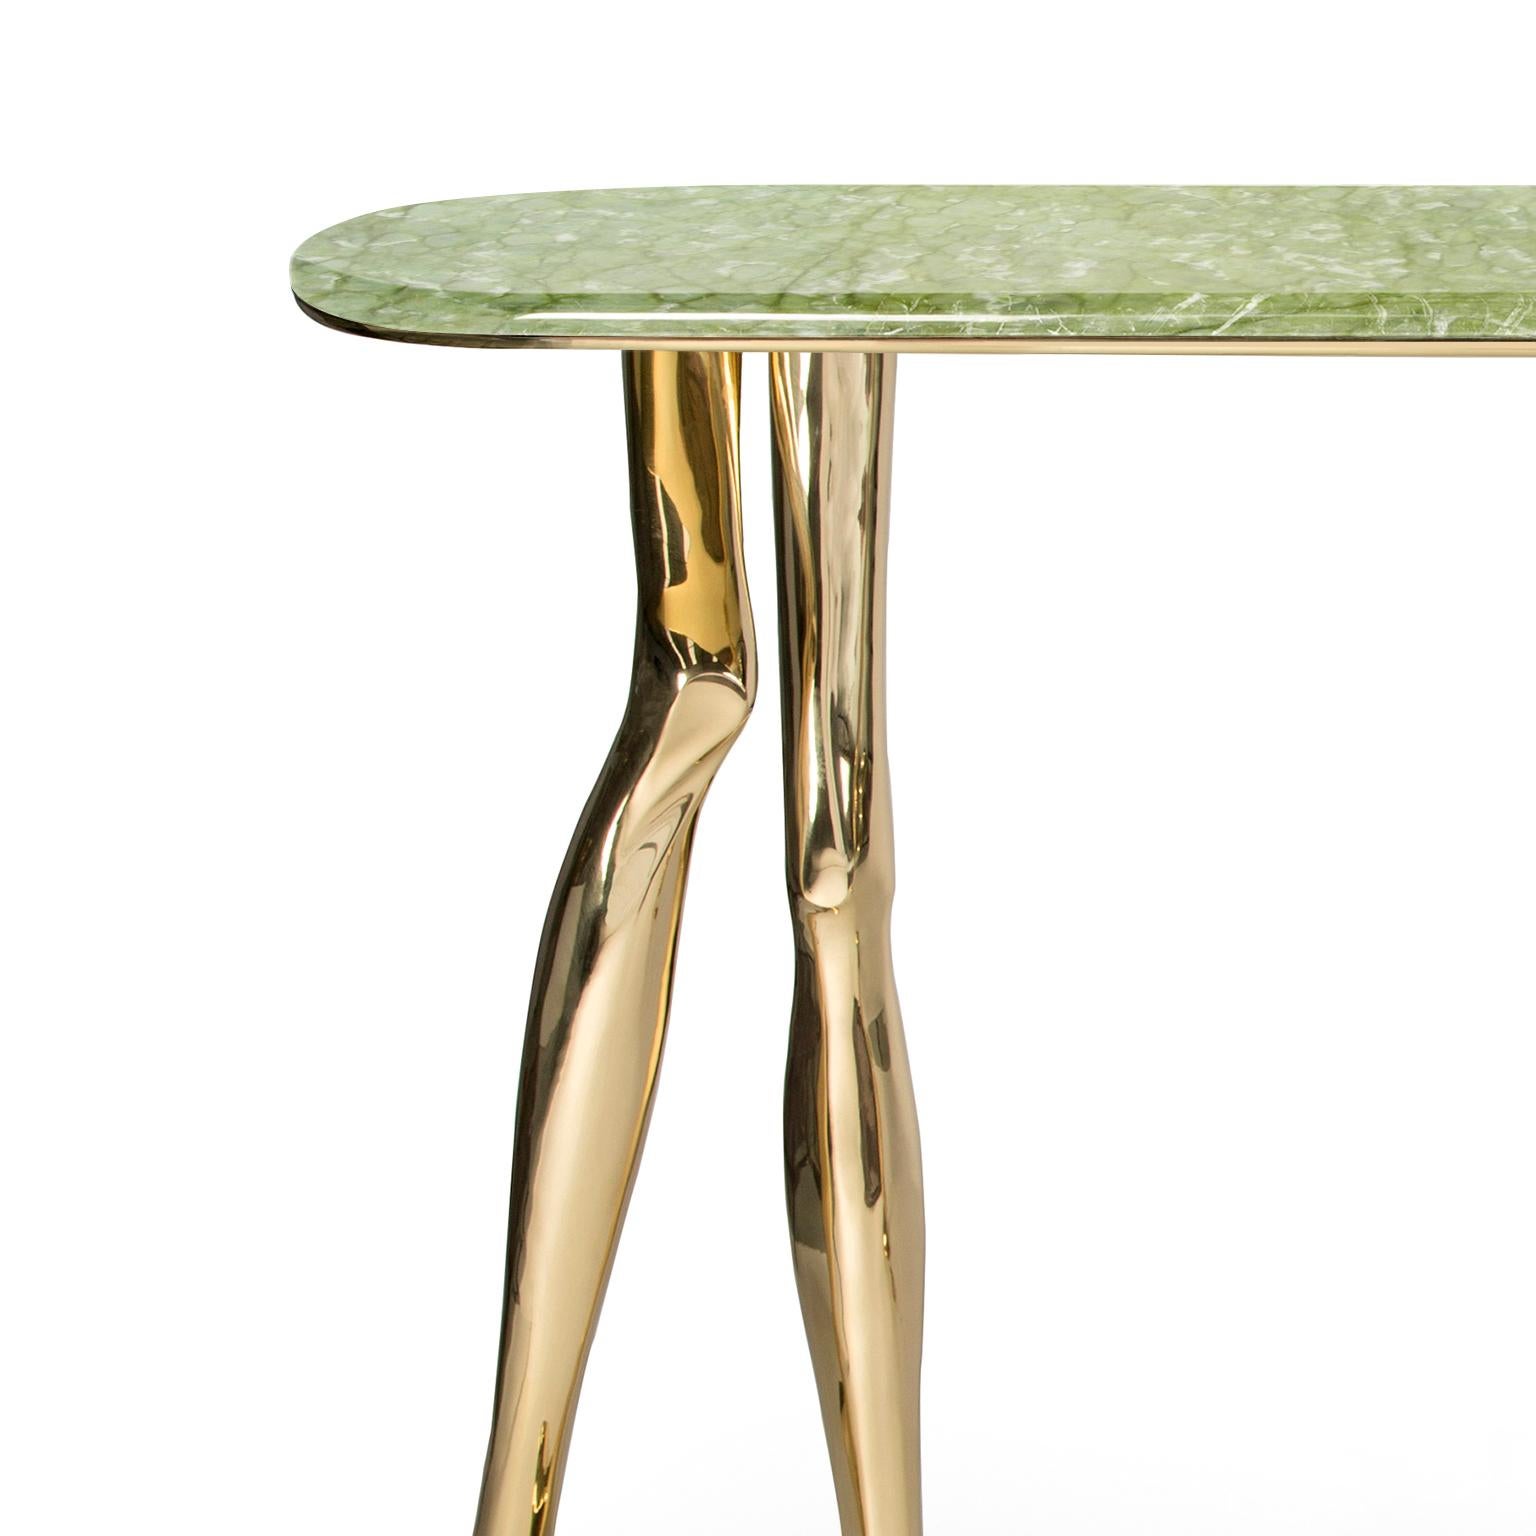 Portuguese Modern Monroe Console Table, Polished Brass, Ming Marble, Functional Art Console For Sale